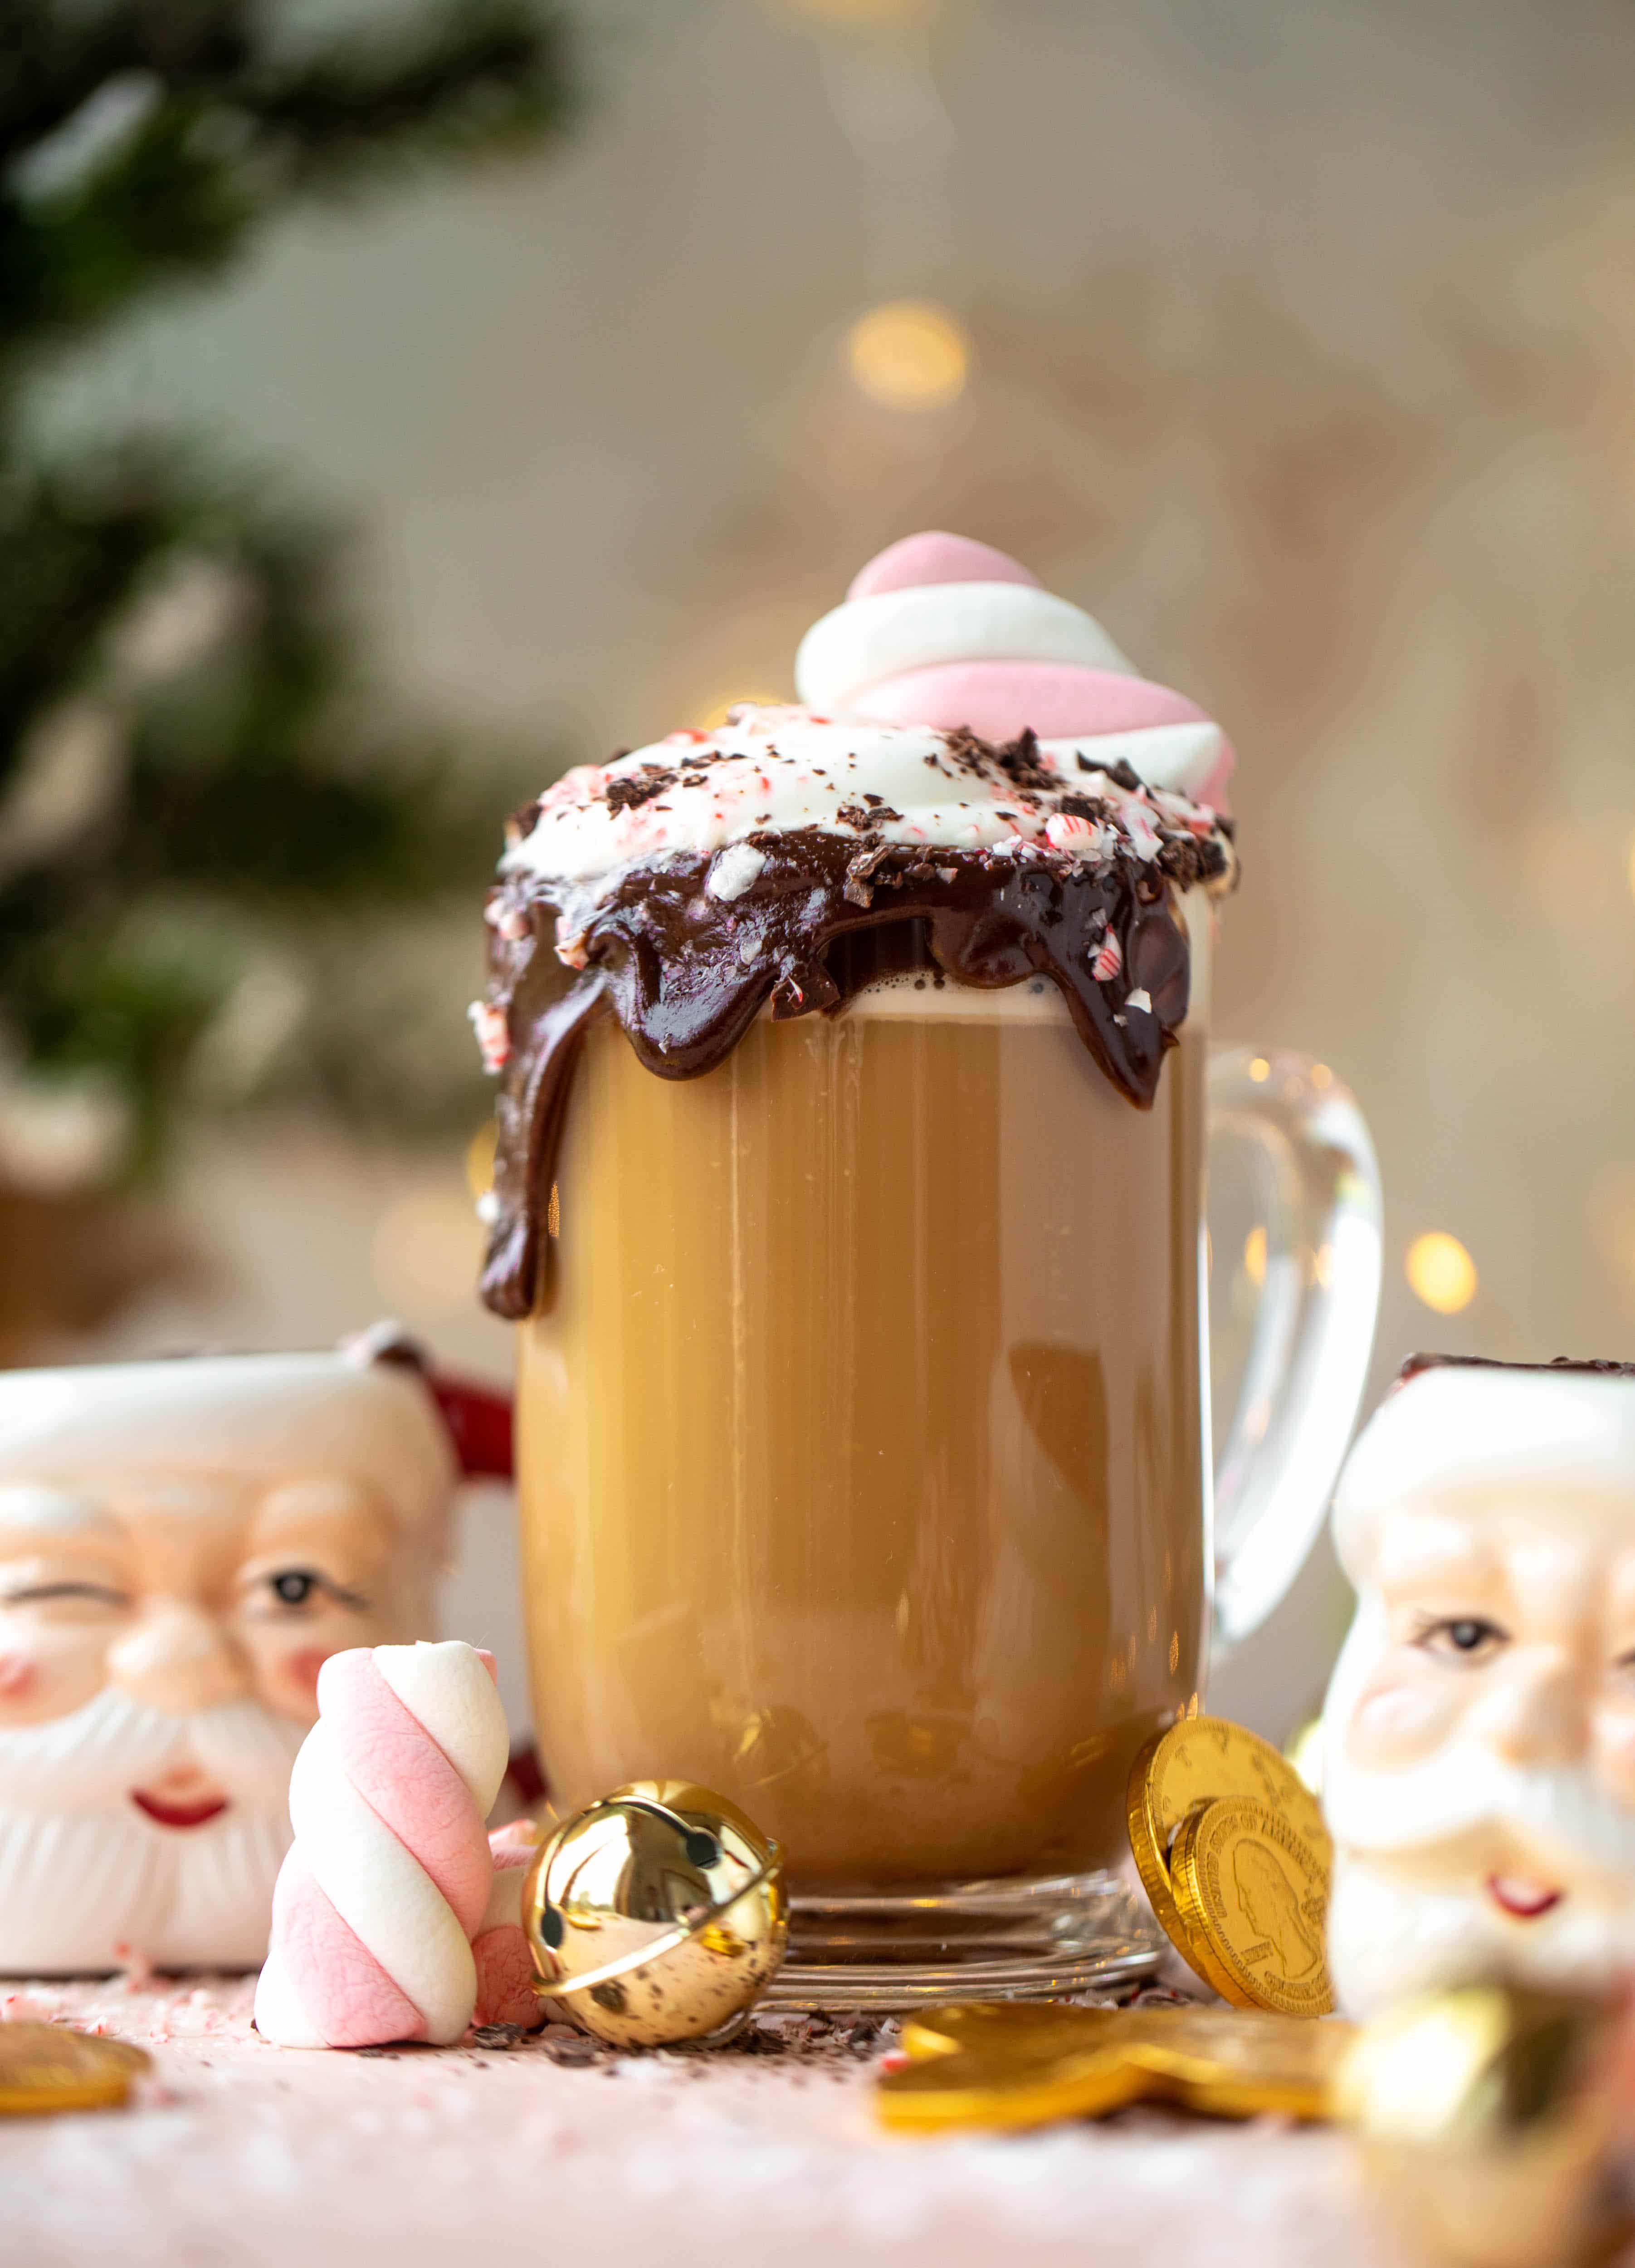 The saint nick special cocktail is perfect for the holiday season! Coffee, whiskey and irish cream come together to create a comforting, delish drink!